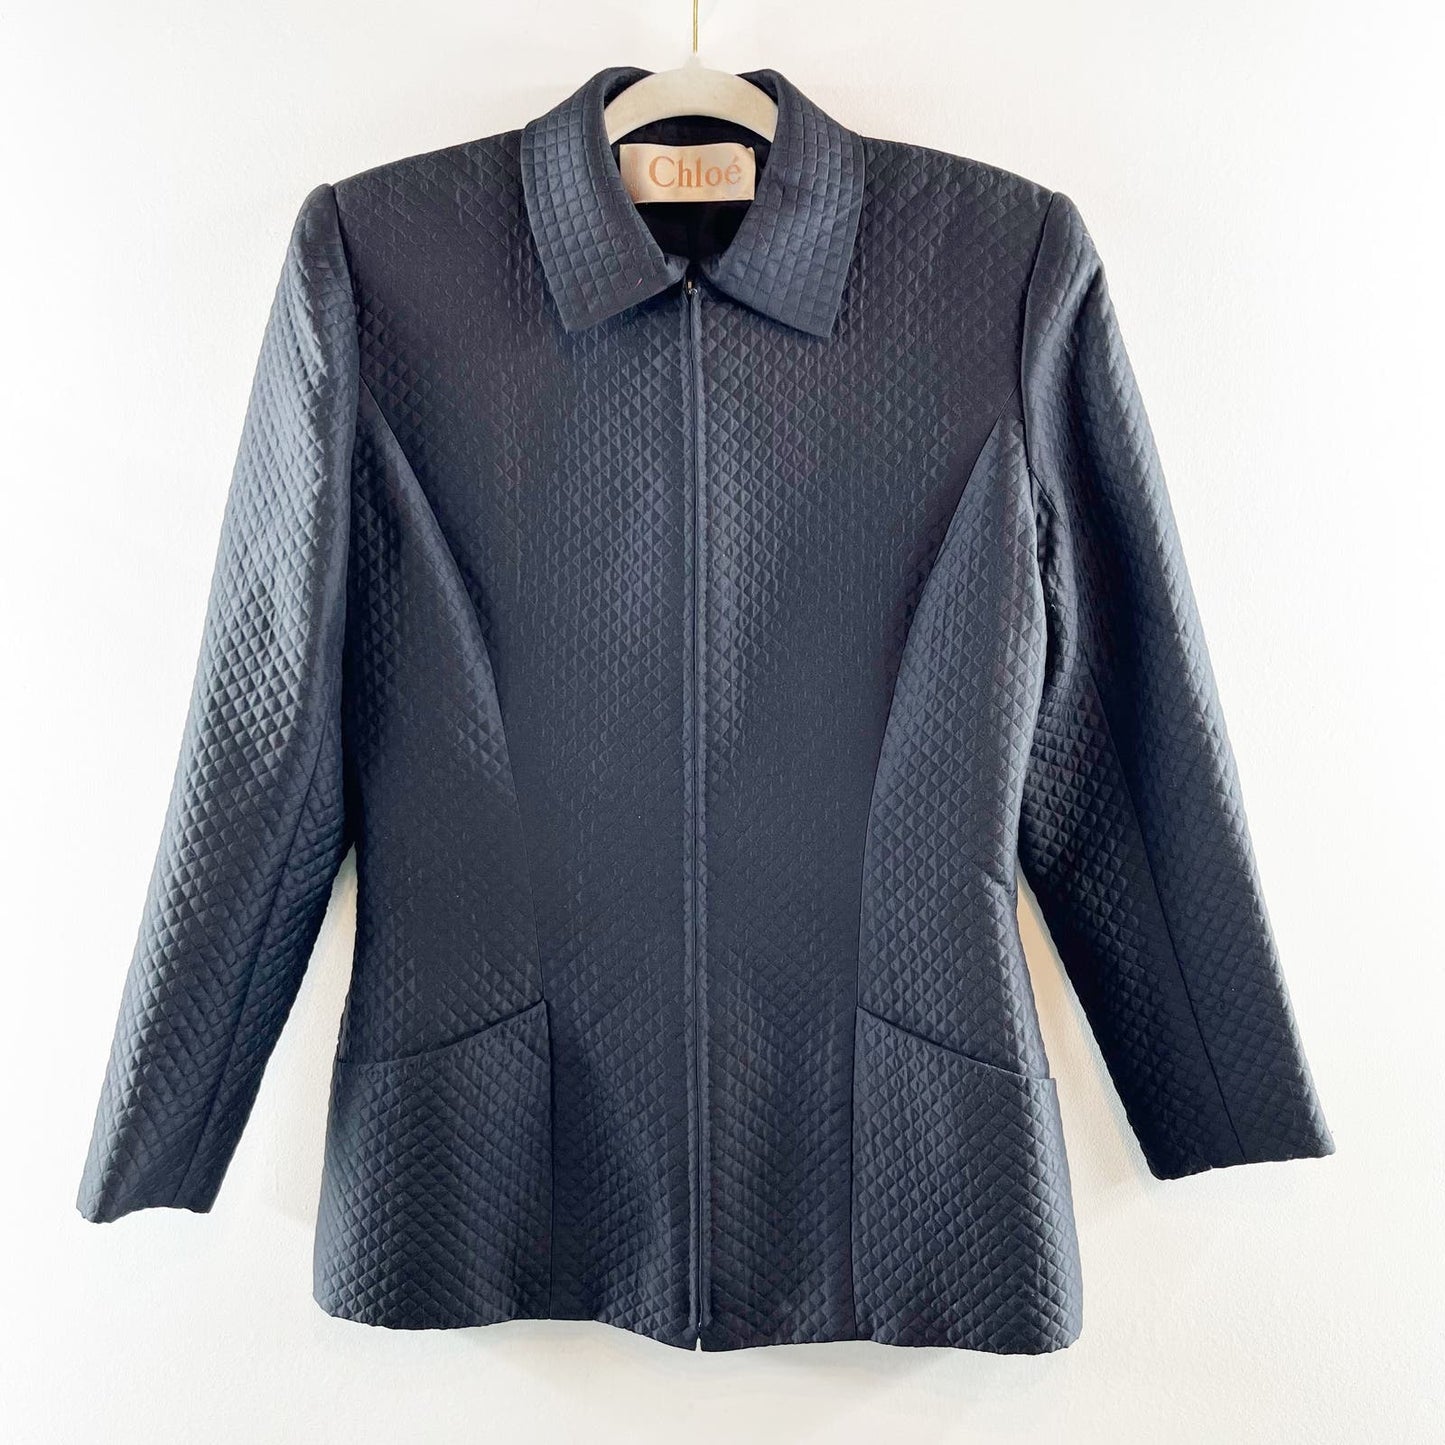 Chloe Zip Up Quilted Blazer Jacket Coat Lined Black Small